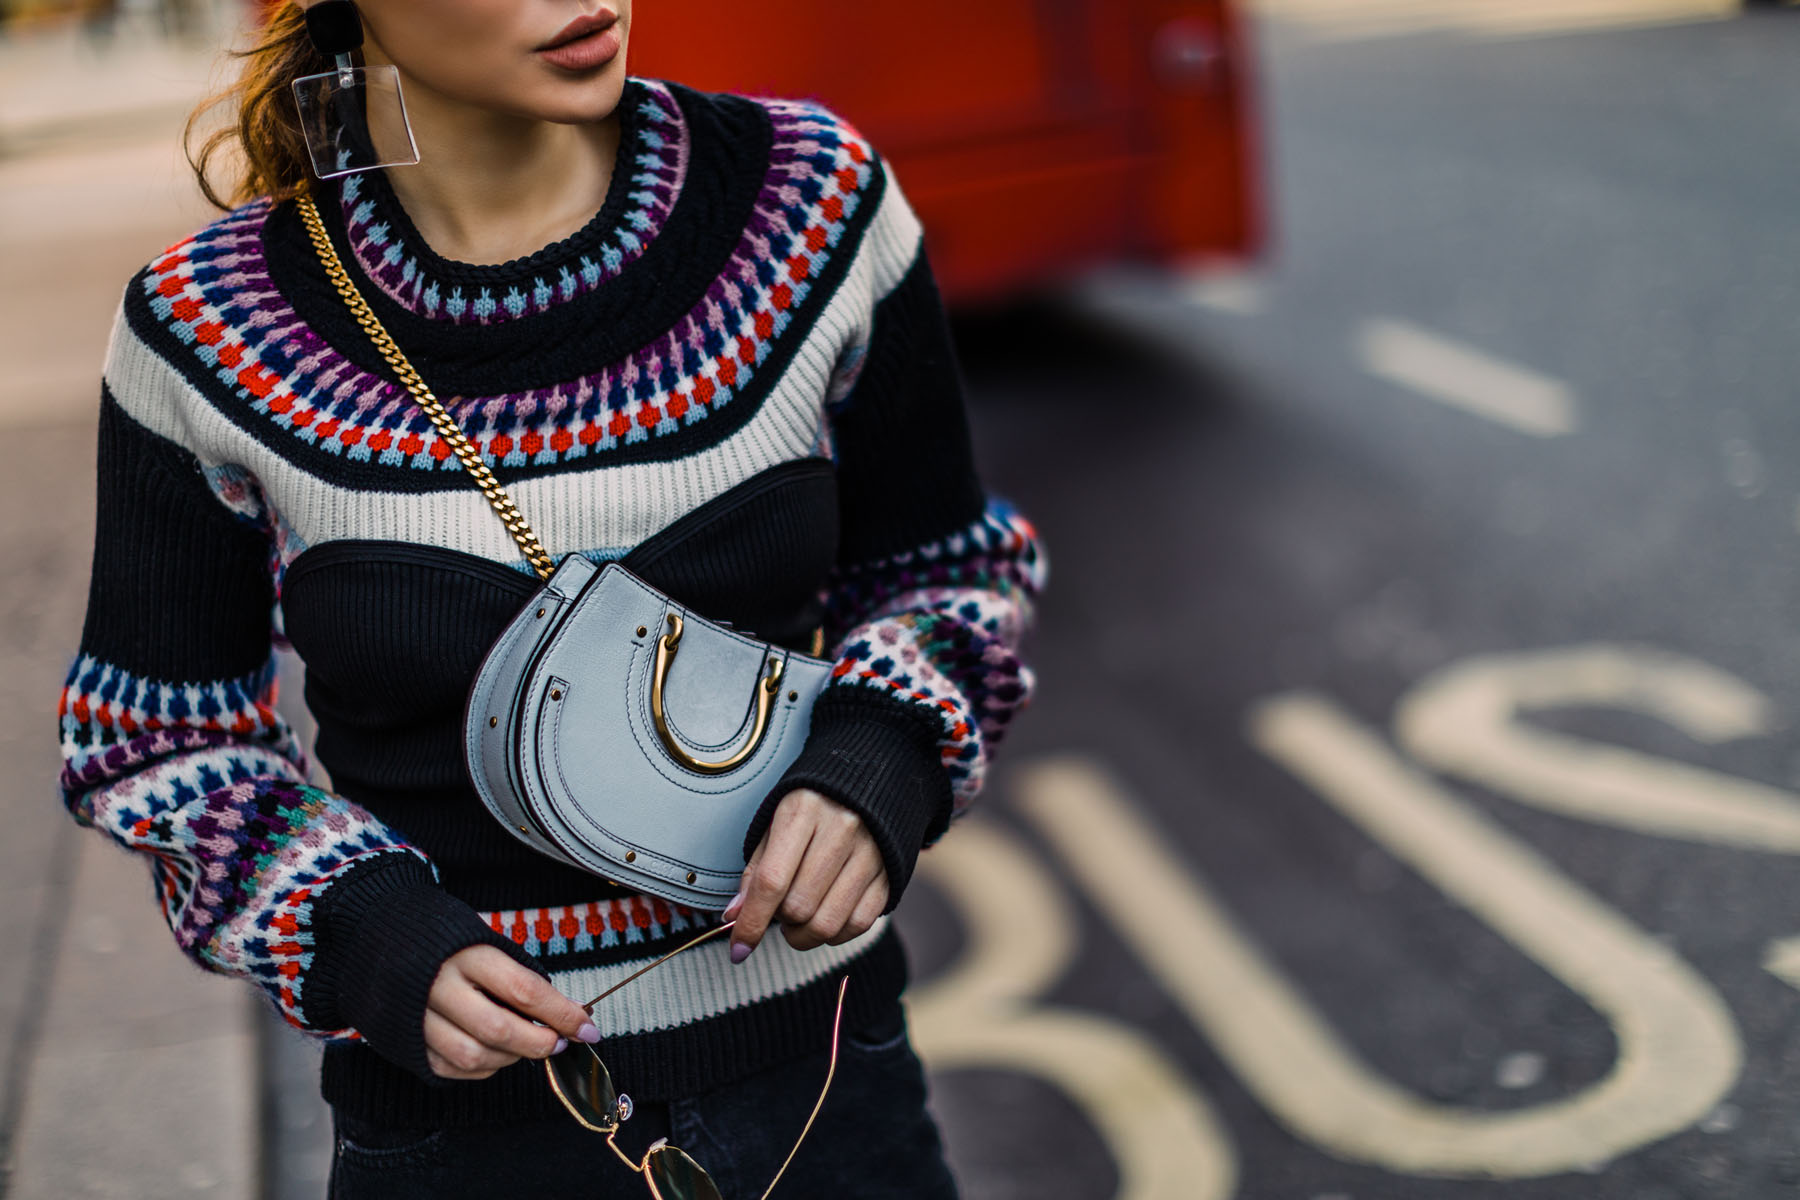 London Fashion Week Highlights - Burberry Sweater, Chloe Bag, and Sneakers, LFW Street Style, London Fashion Week Outfits // Notjessfashion.com